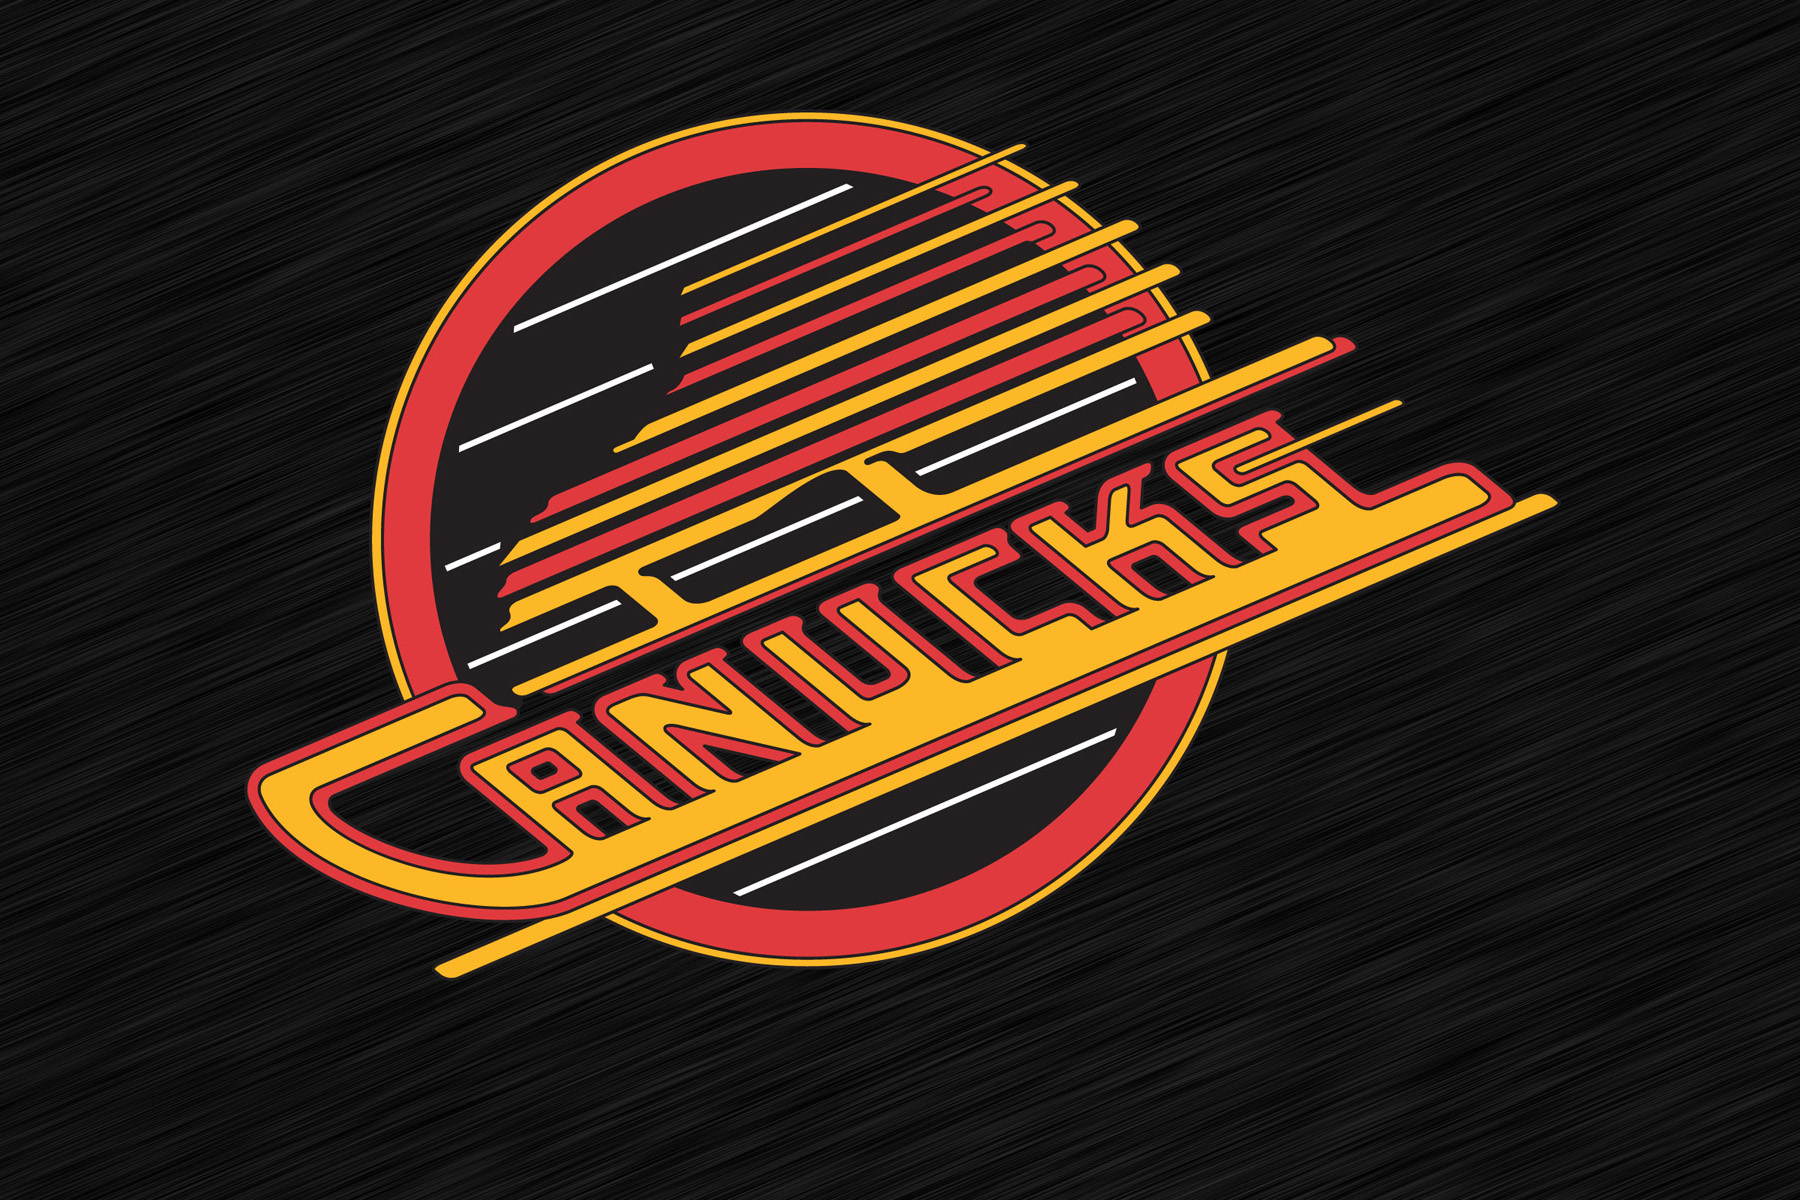 The Jersey History of the Vancouver Canucks 